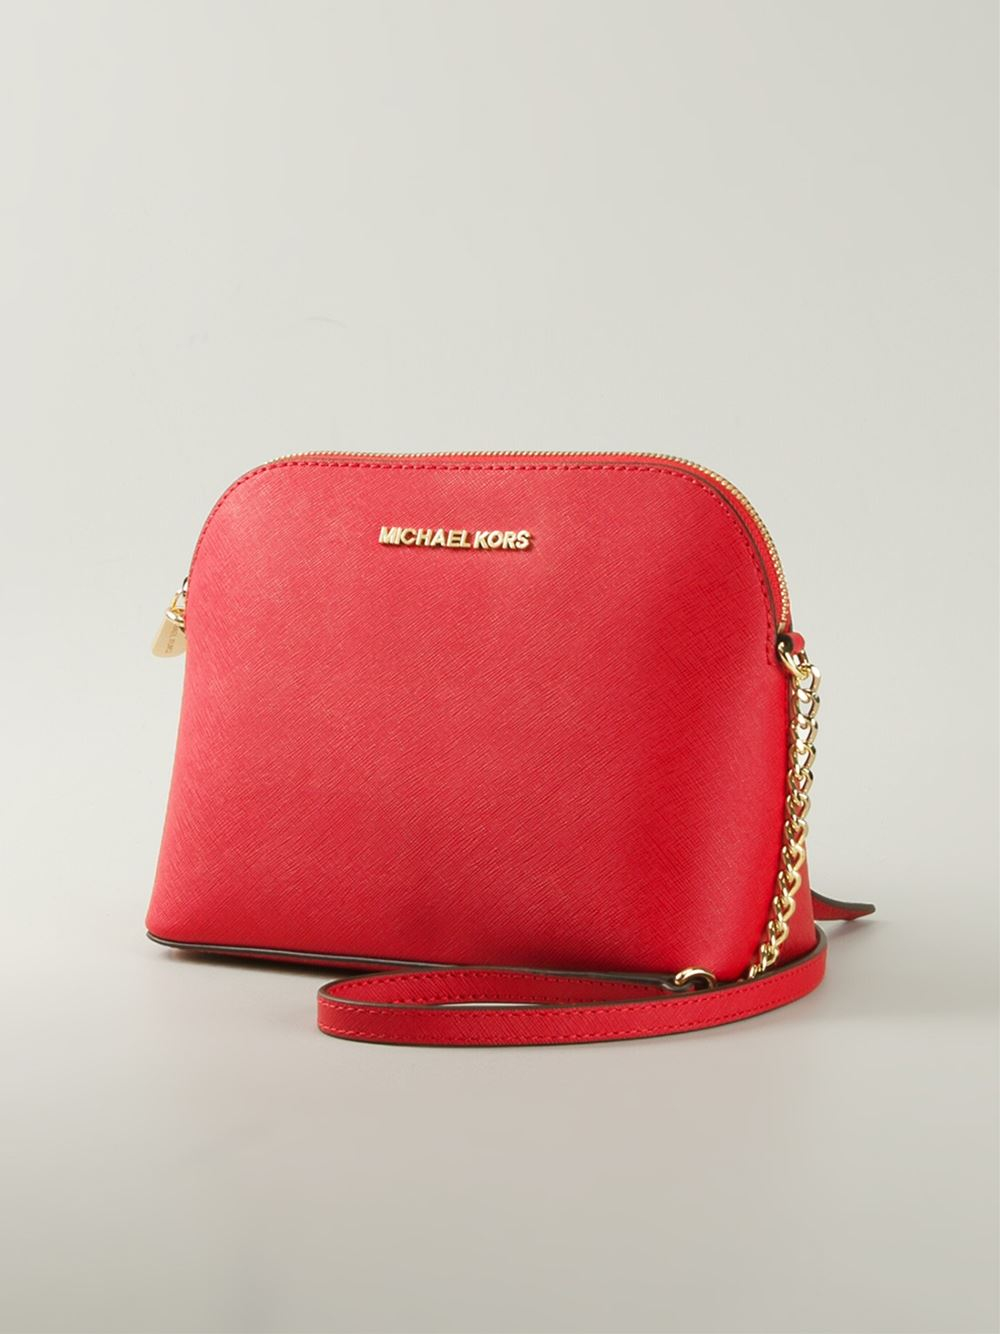 Michael Kors Emmy Cindy Dome Medium Top Zip Crossbody Saffiano Leather Red  - ShopperBoard